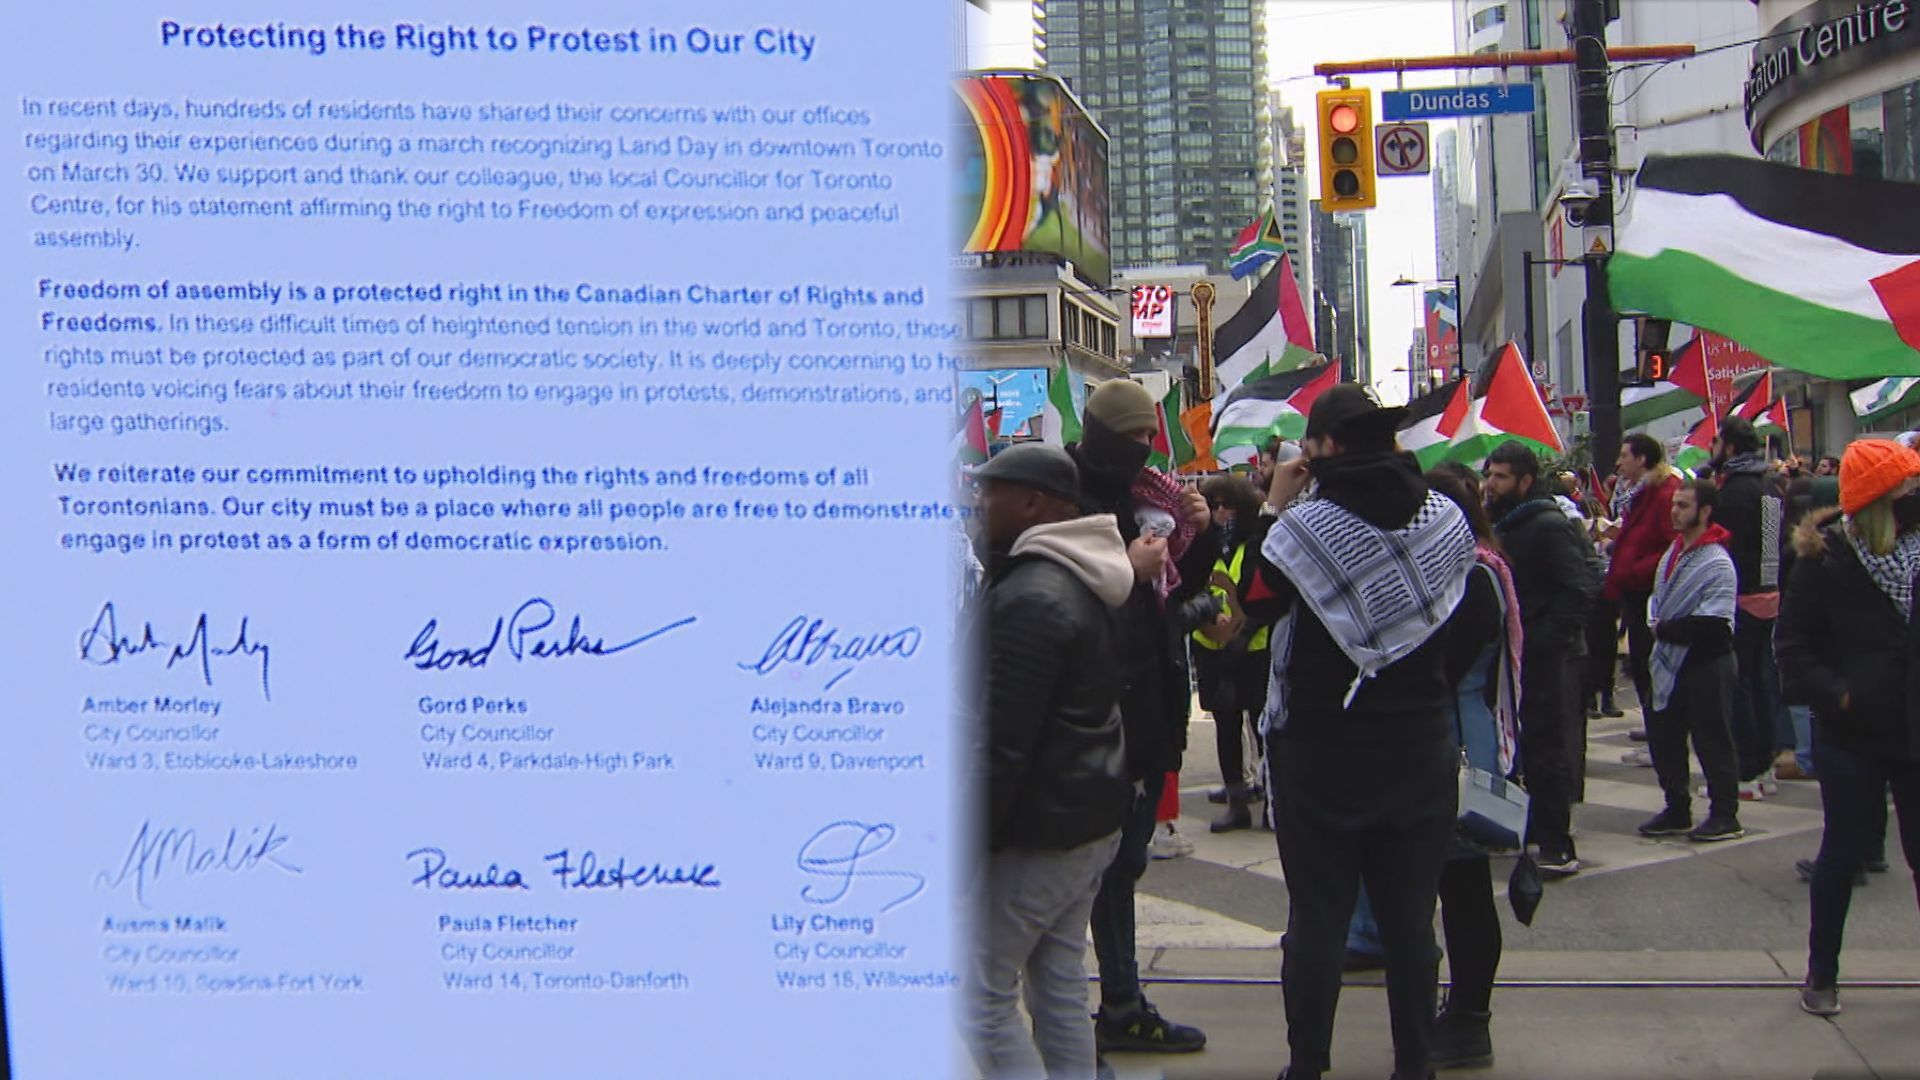 Mayor Chow defends letter from city councillors over right to protest